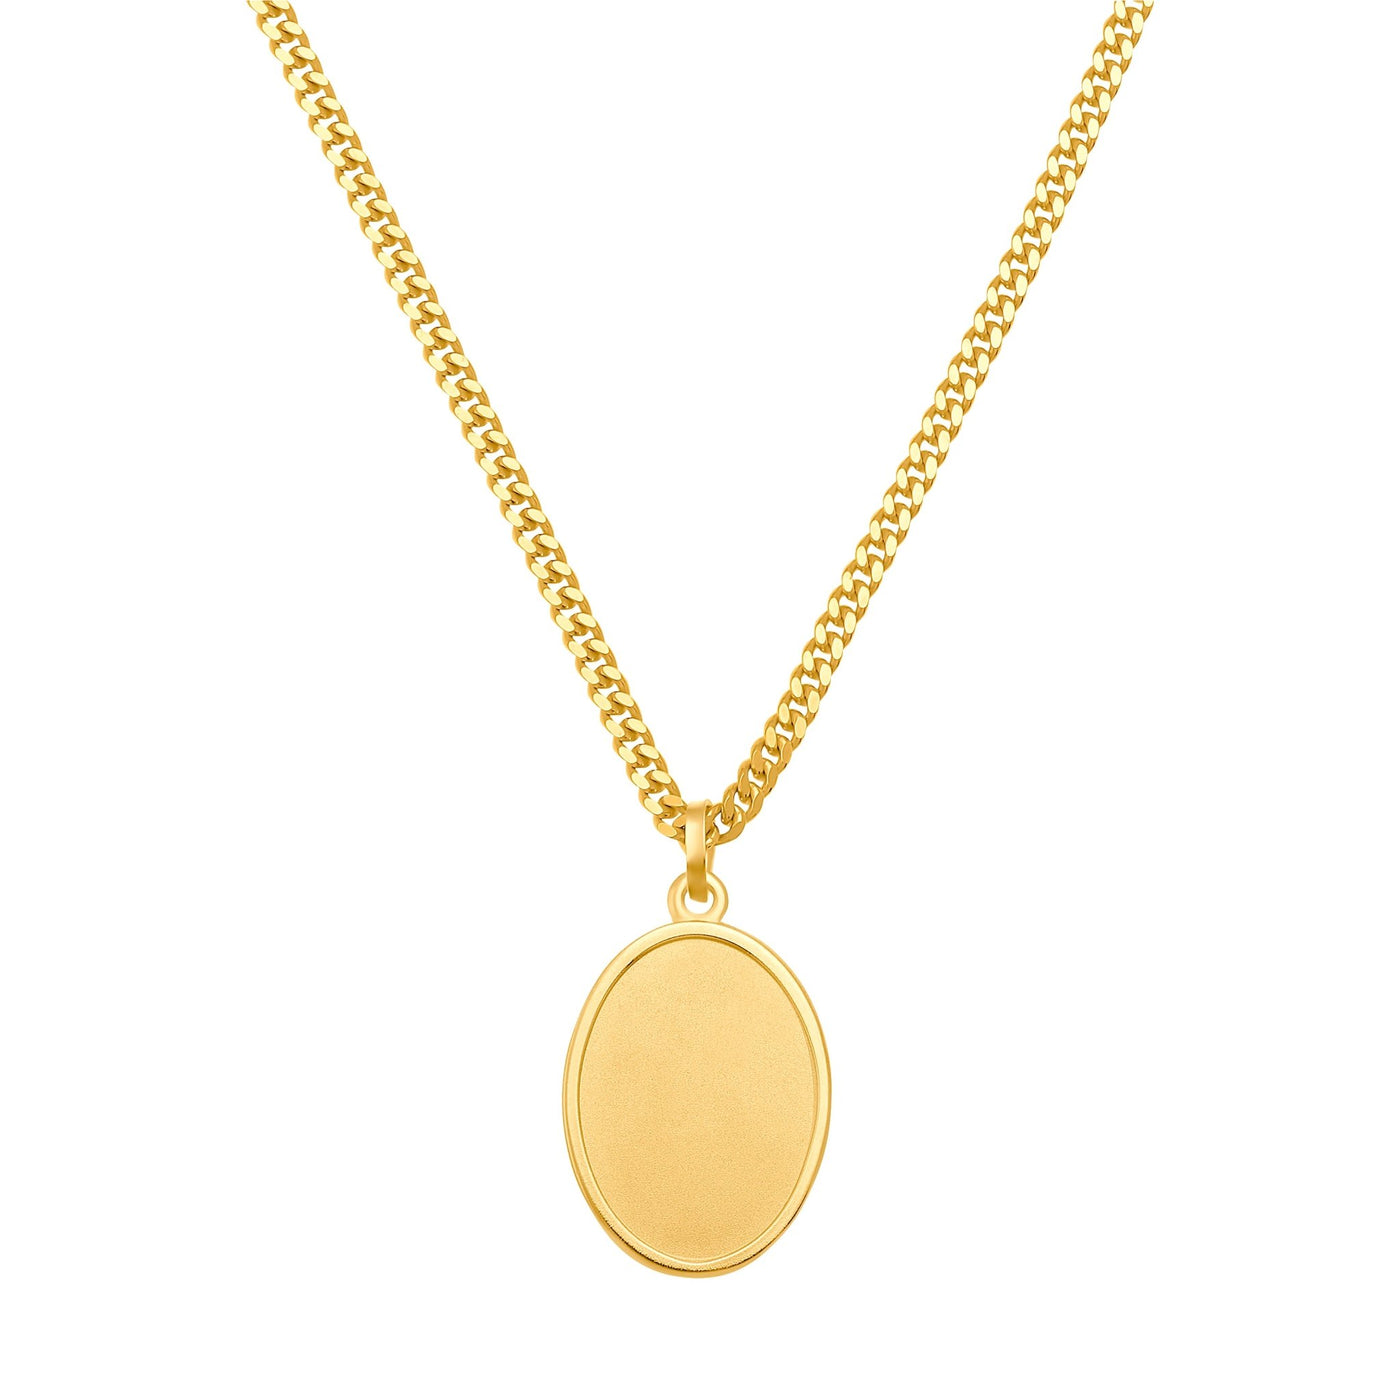 ENGRAVING PLATE OVAL NECKLACE 925 SILVER 18K GOLD PLATED - IDENTIM®